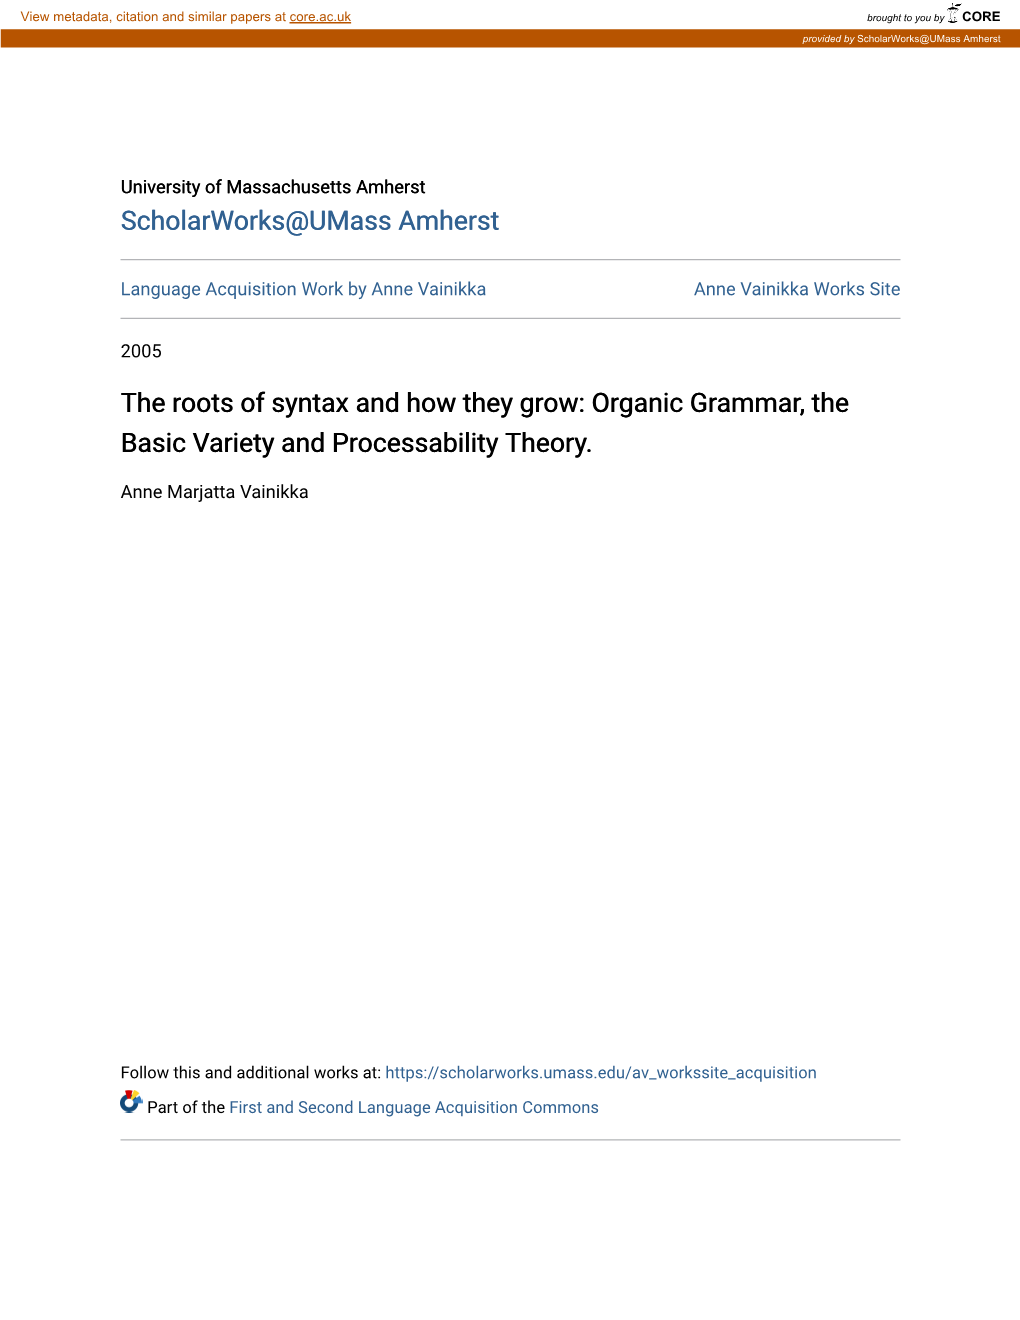 Organic Grammar, the Basic Variety and Processability Theory